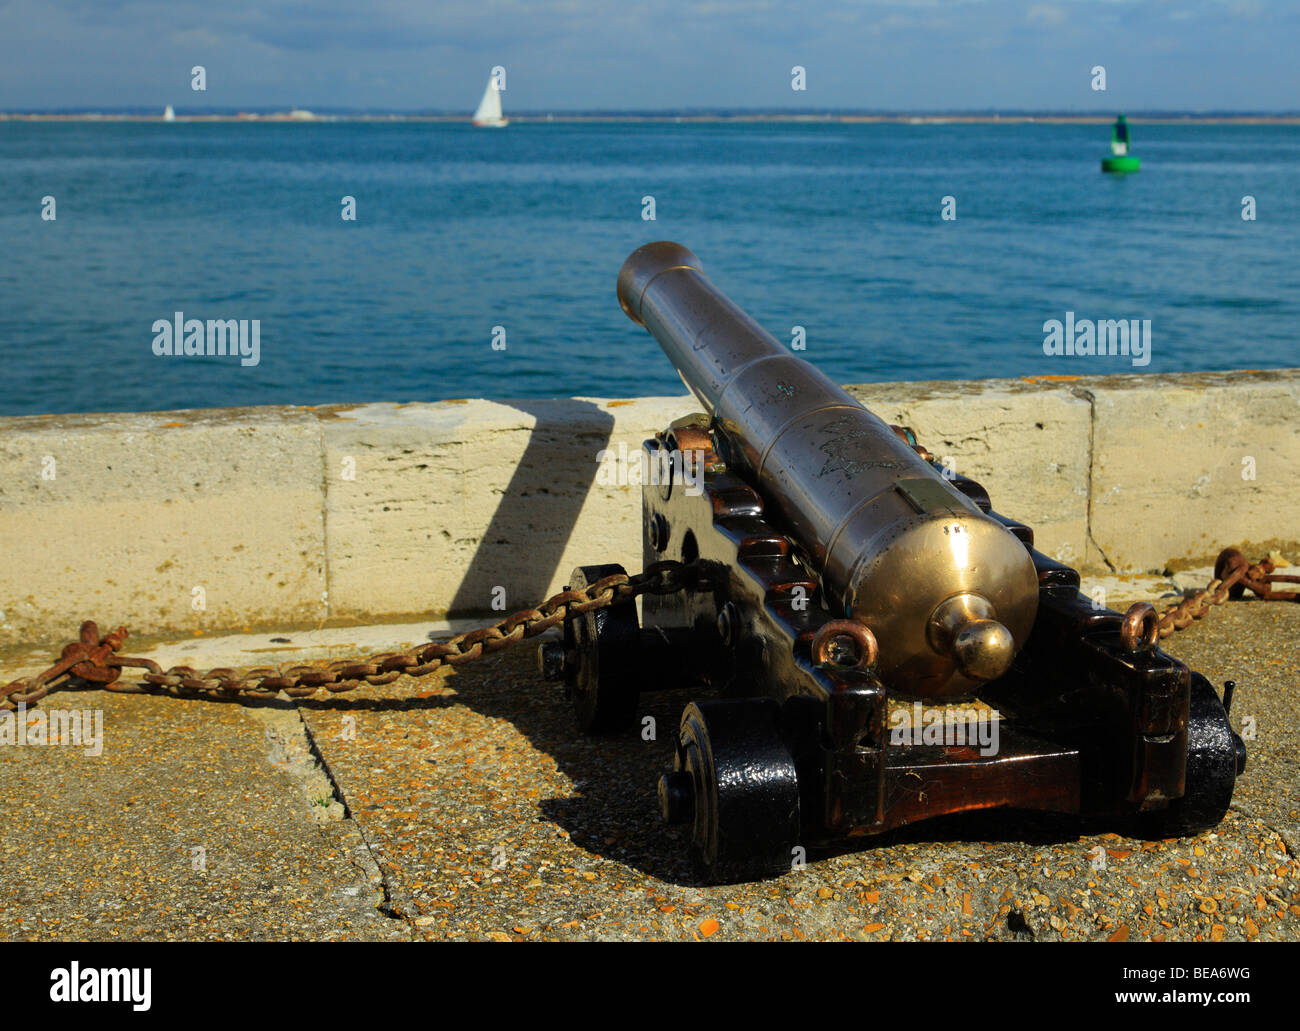 Royal Yacht Squadron starting cannons. Cowes, Isle of Wight, England, UK. Stock Photo